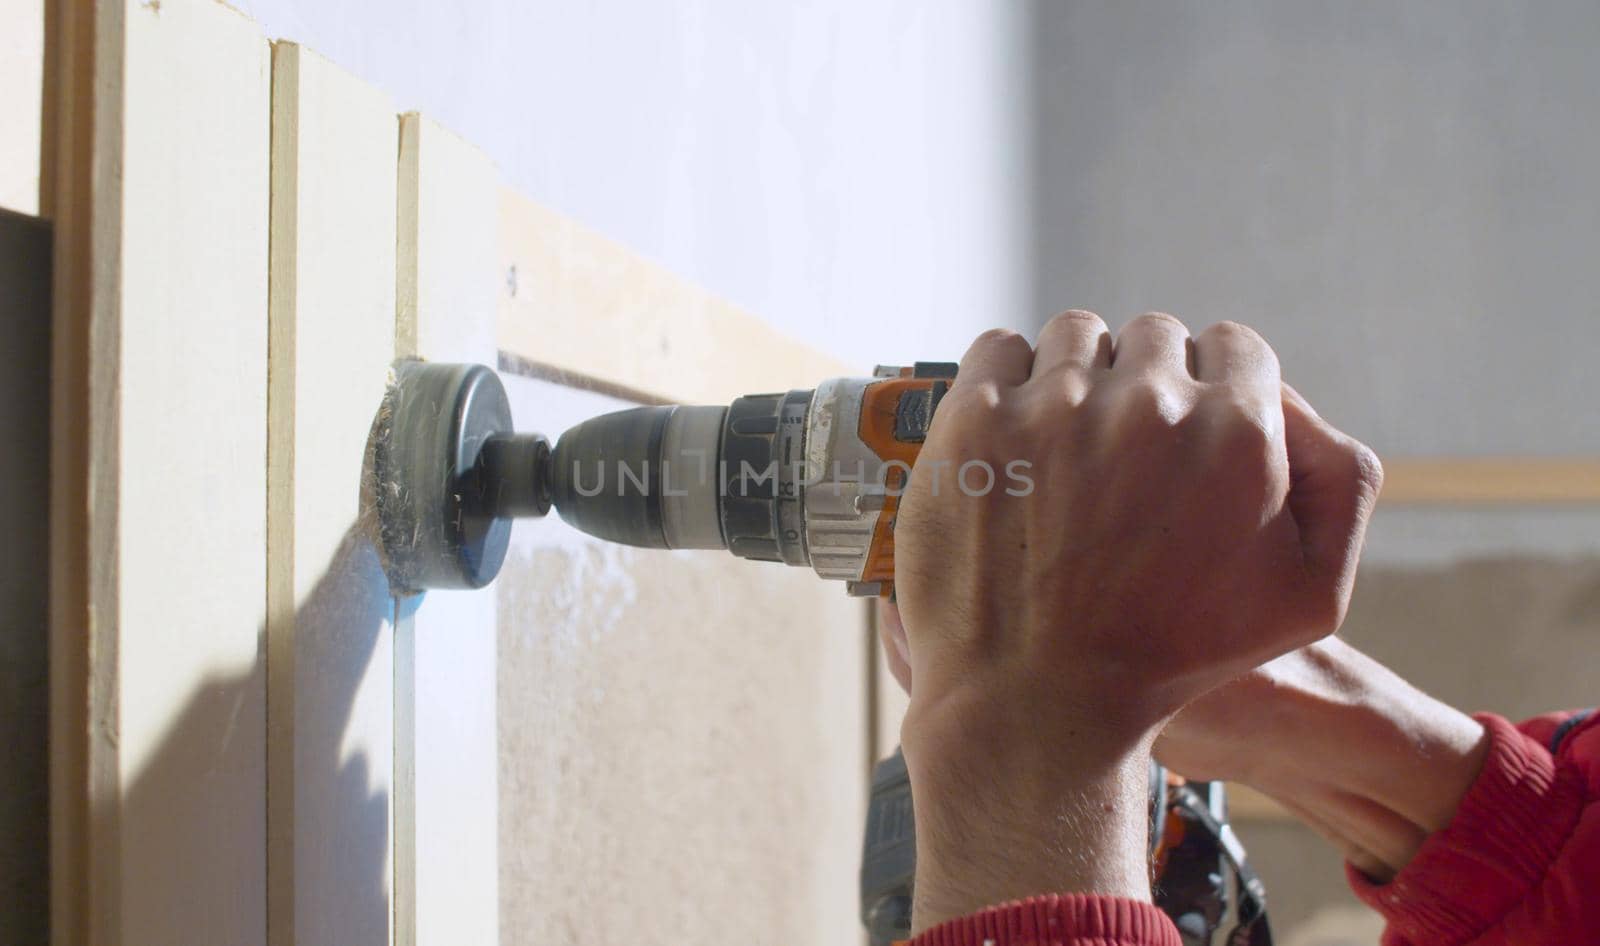 The builder cuts a round hole in the wooden board for an electrical switch using a special tool and a drill